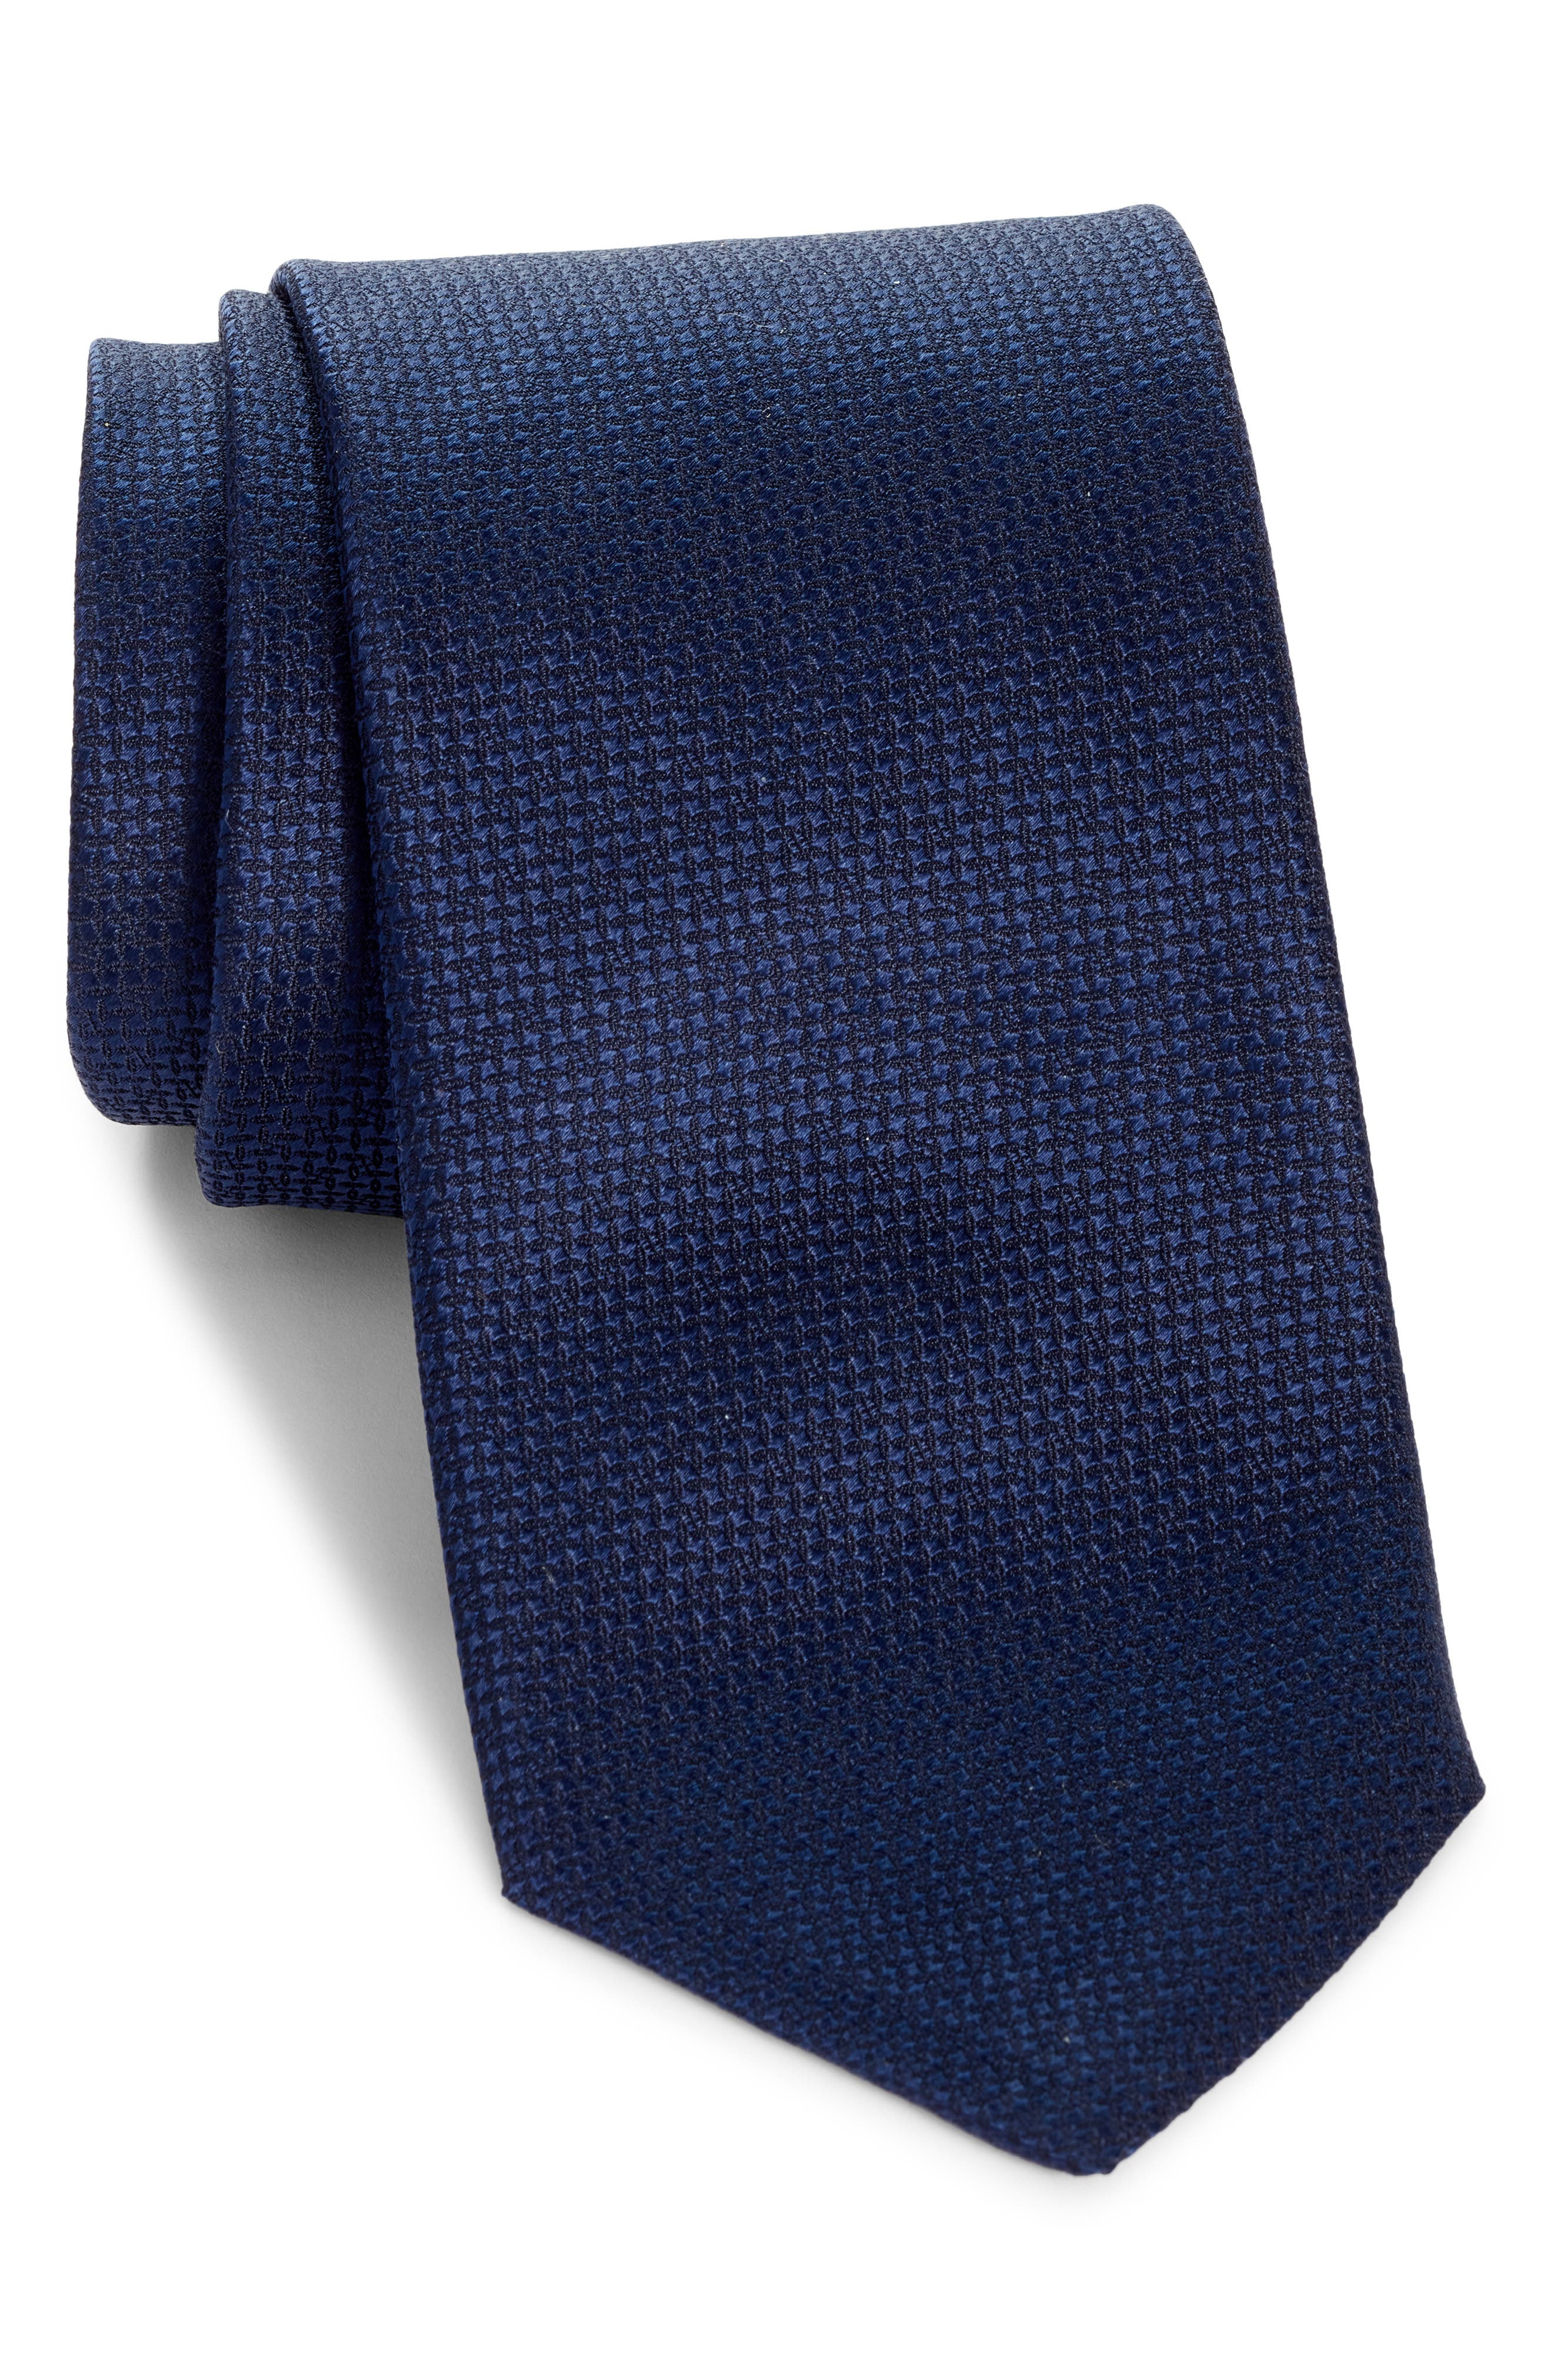 Woven 100% Pure Silk Neck Tie  with Olive and Royal Blue Diagonal Stripes 